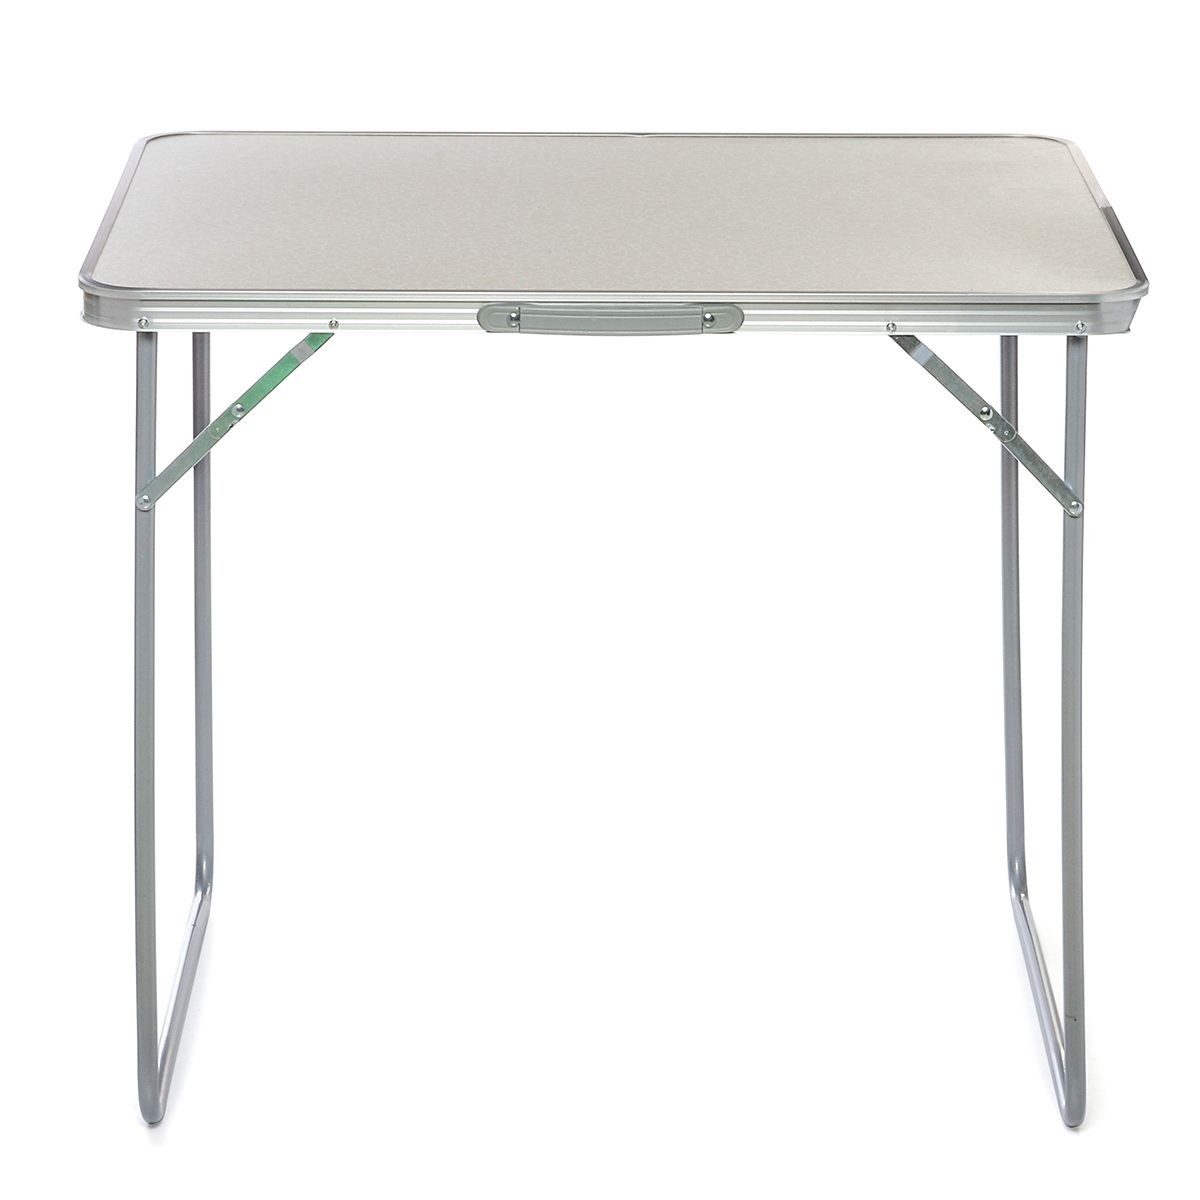 Portable Foldable Outdoor Table Aluminium Alloy Folding Table for Outdoor Beach Picnic Hiking Camping with Carrying Handle